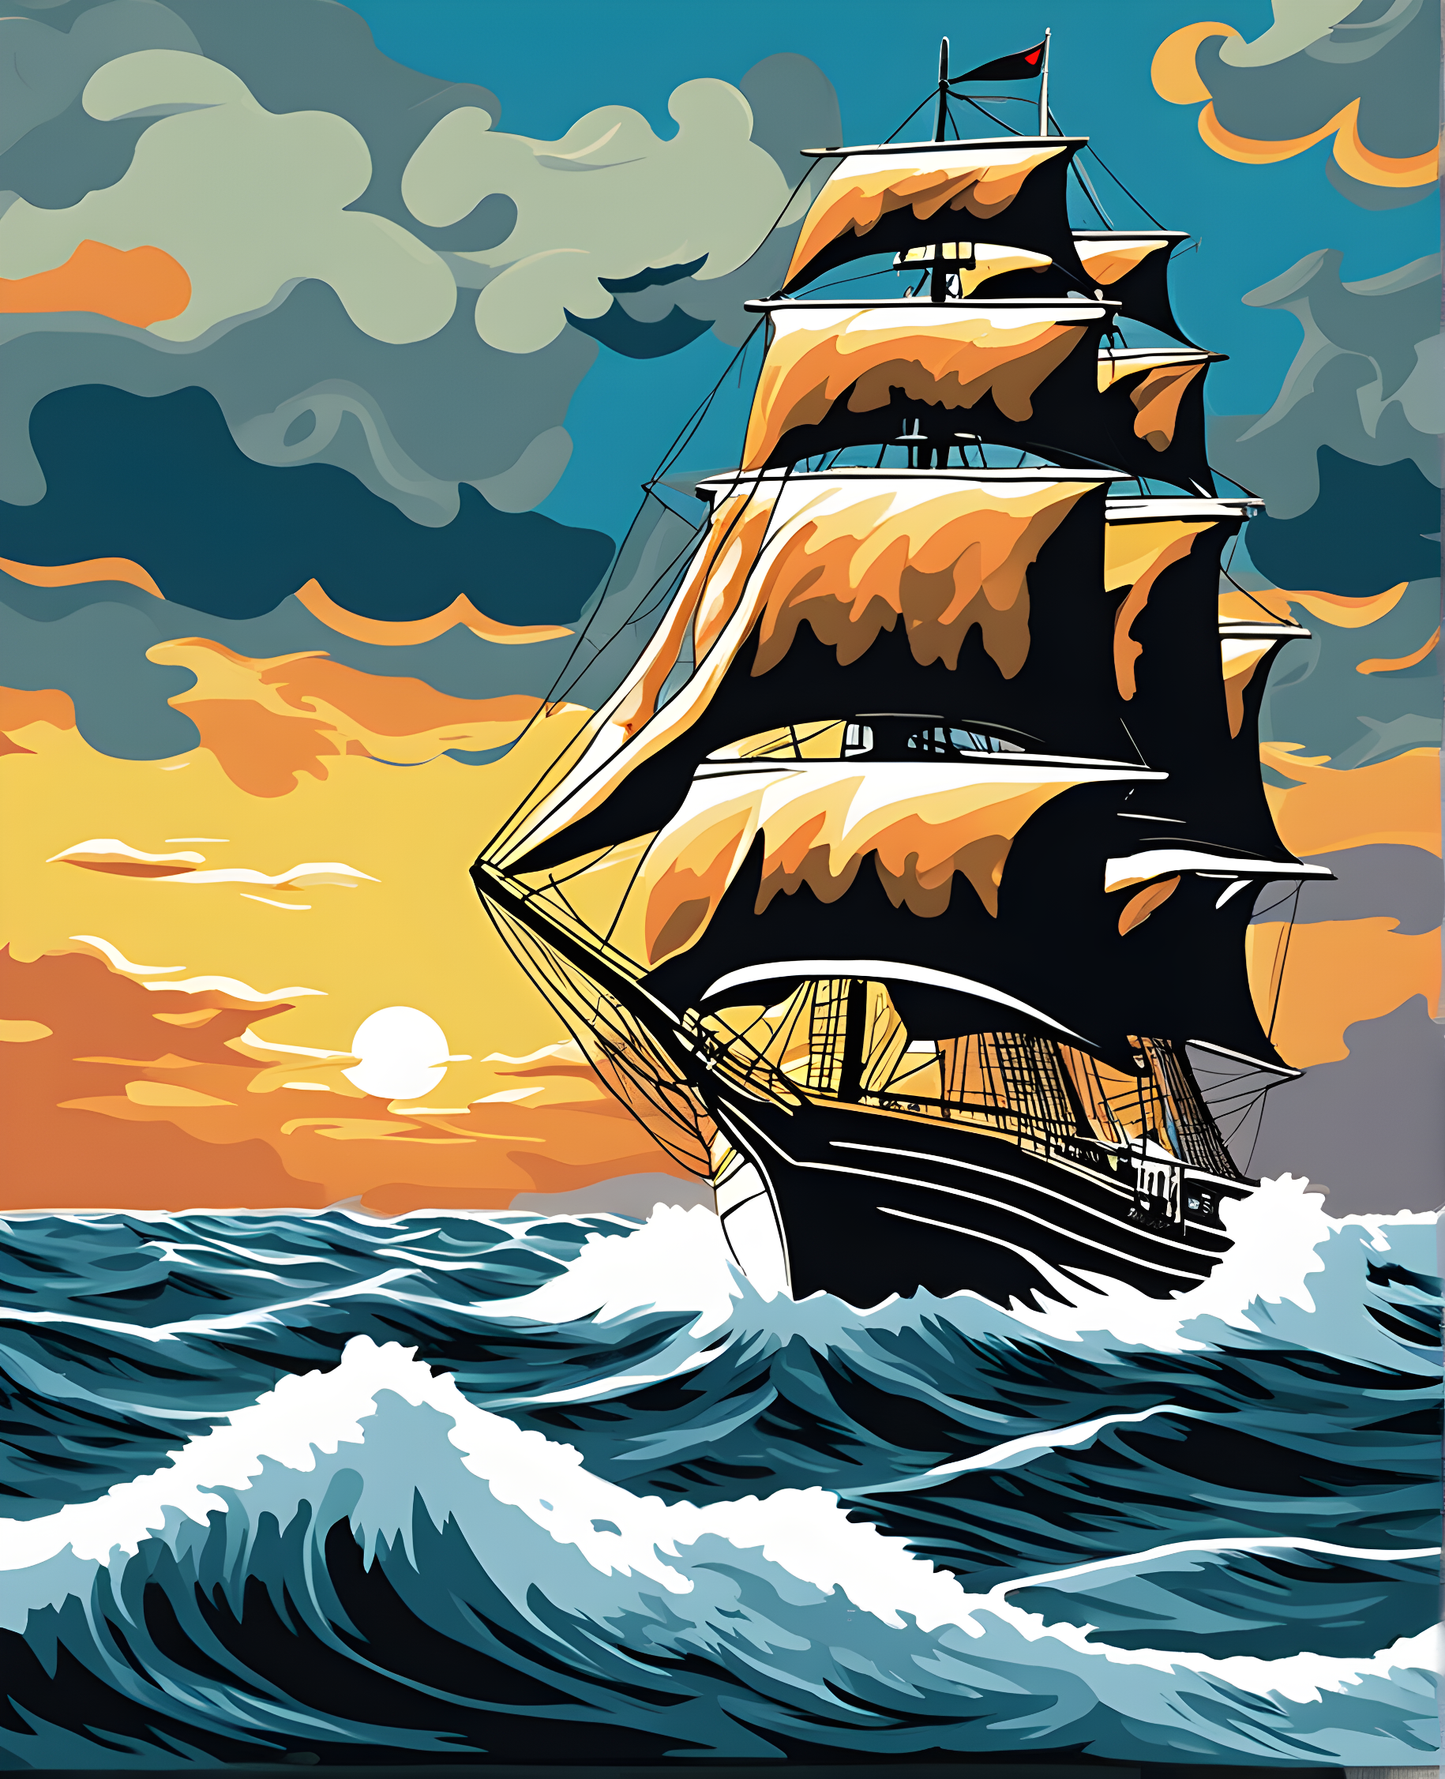 Sailing ship on Stormy Sea - Van-Go Paint-By-Number Kit